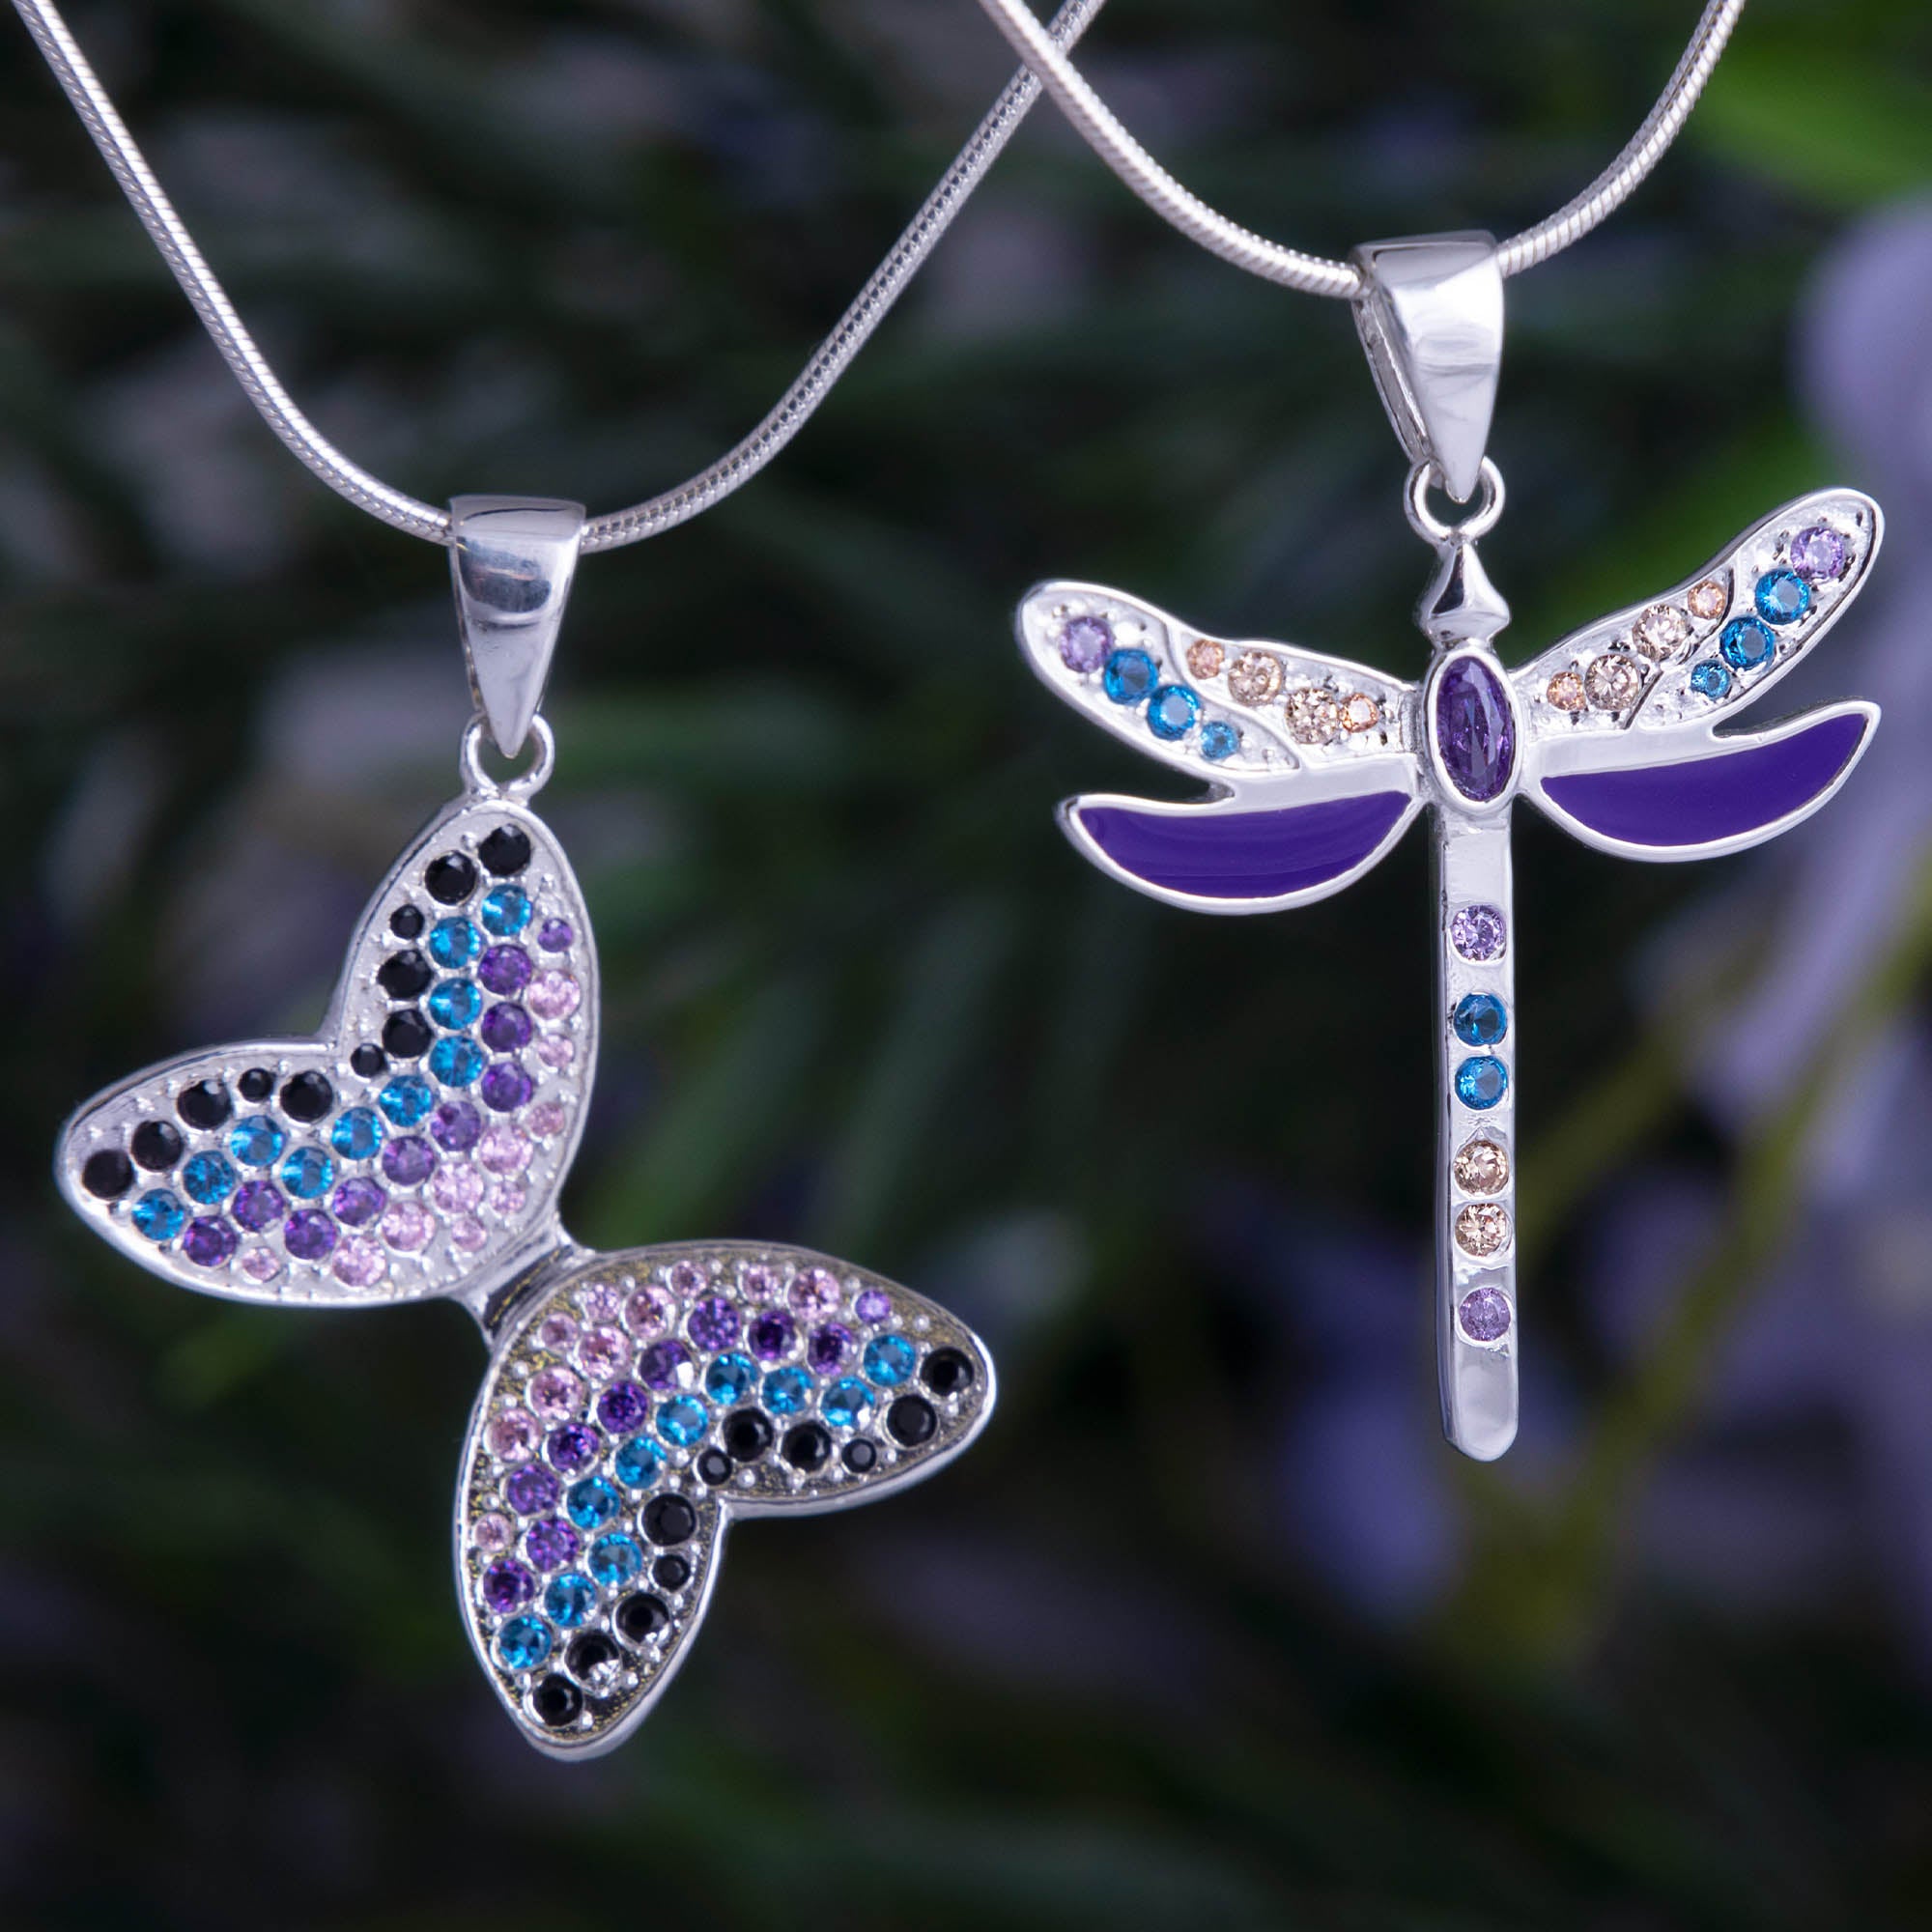 Fluttering Friends Sterling & Crystal Necklace - Butterfly - With Diamond Cut Chain